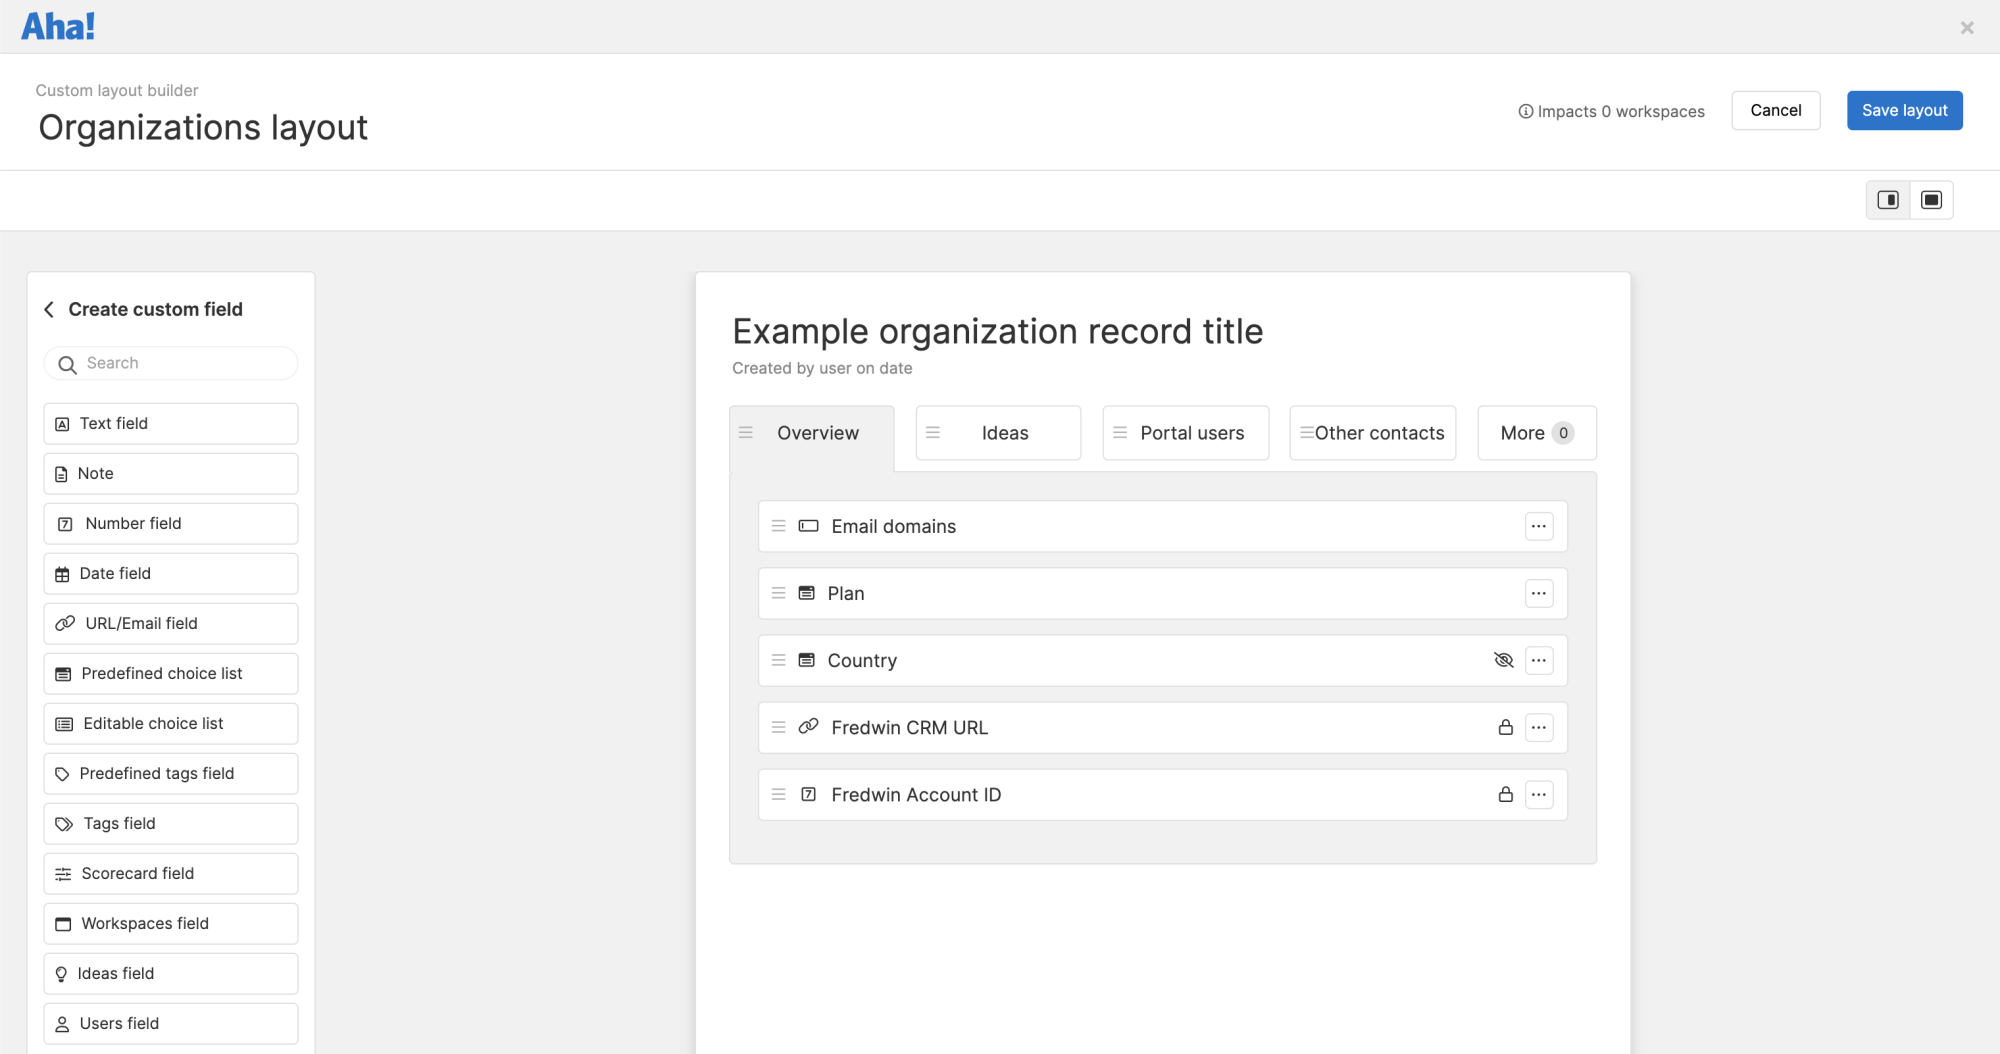 ﻿You can create a custom URL field to link to the corresponding organization record in your CRM system.